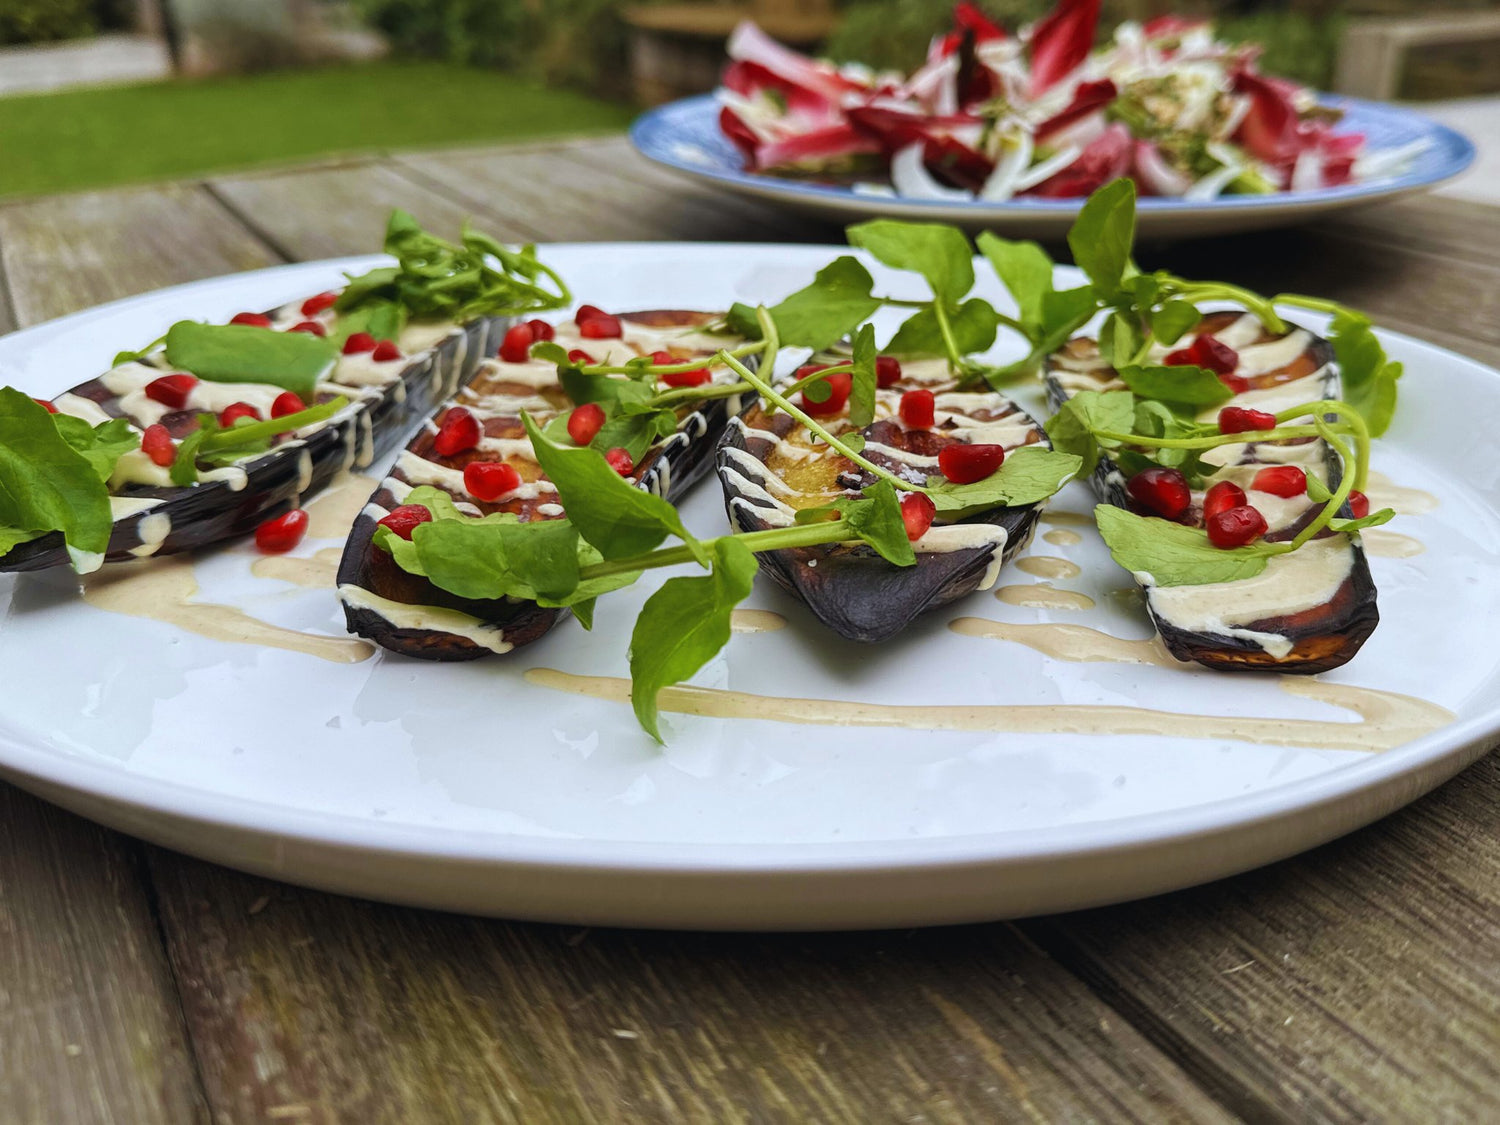 Baked Aubergines with Tahini, Pomegranate, and Watercress by Chef Bart Van Der Lee. - Charlie Oven